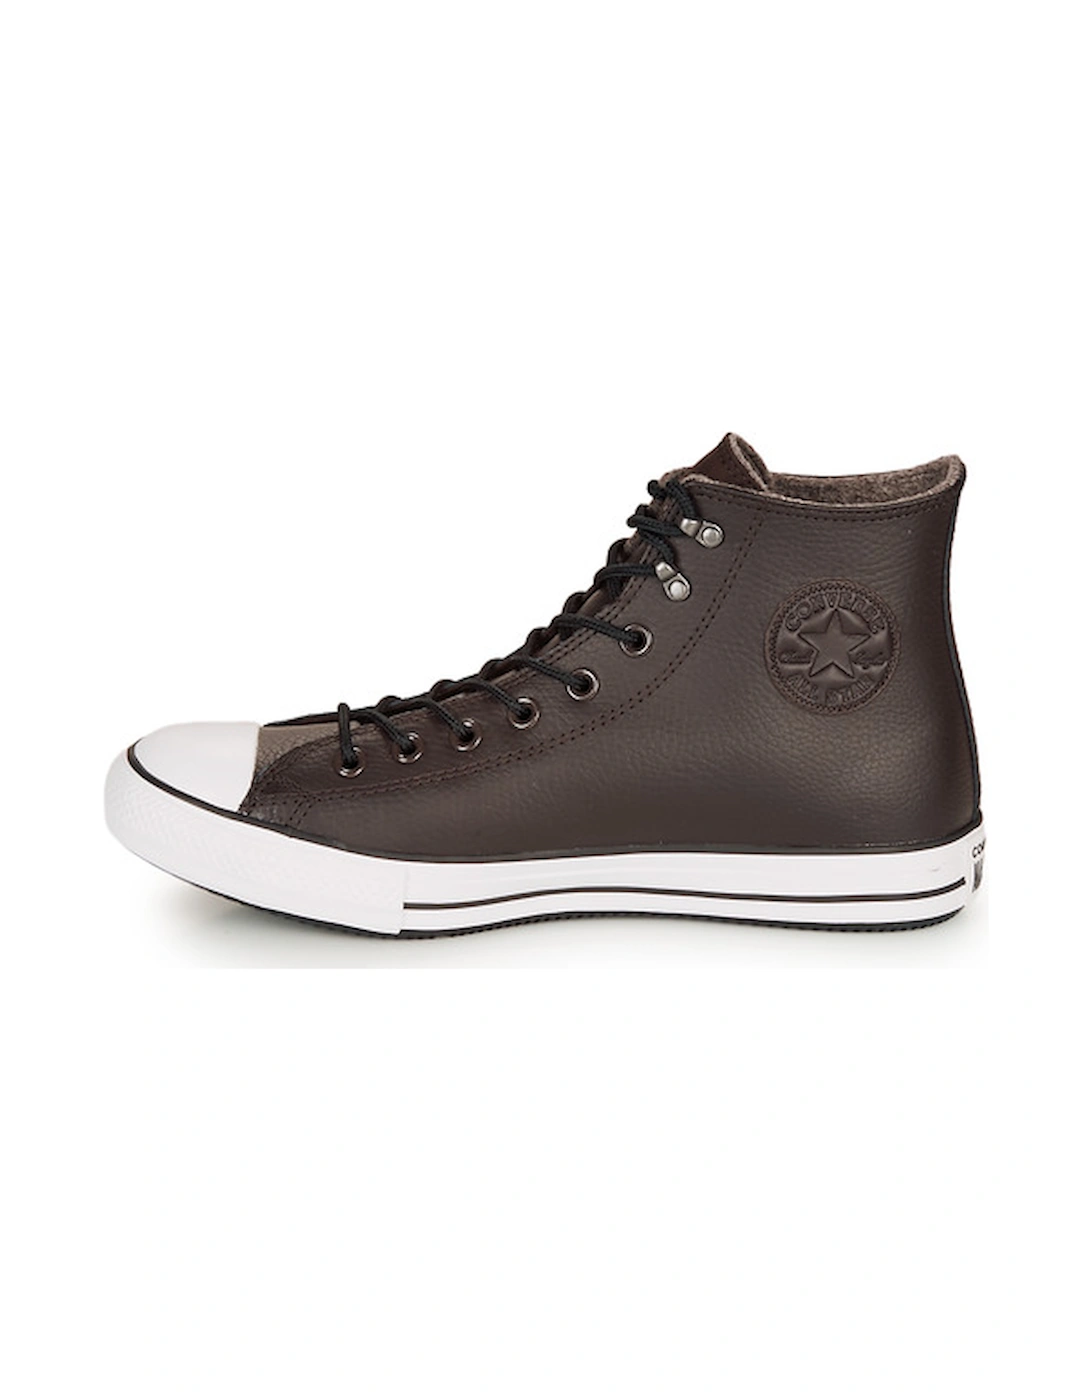 CHUCK TAYLOR ALL STAR WINTER LEATHER BOOT HI